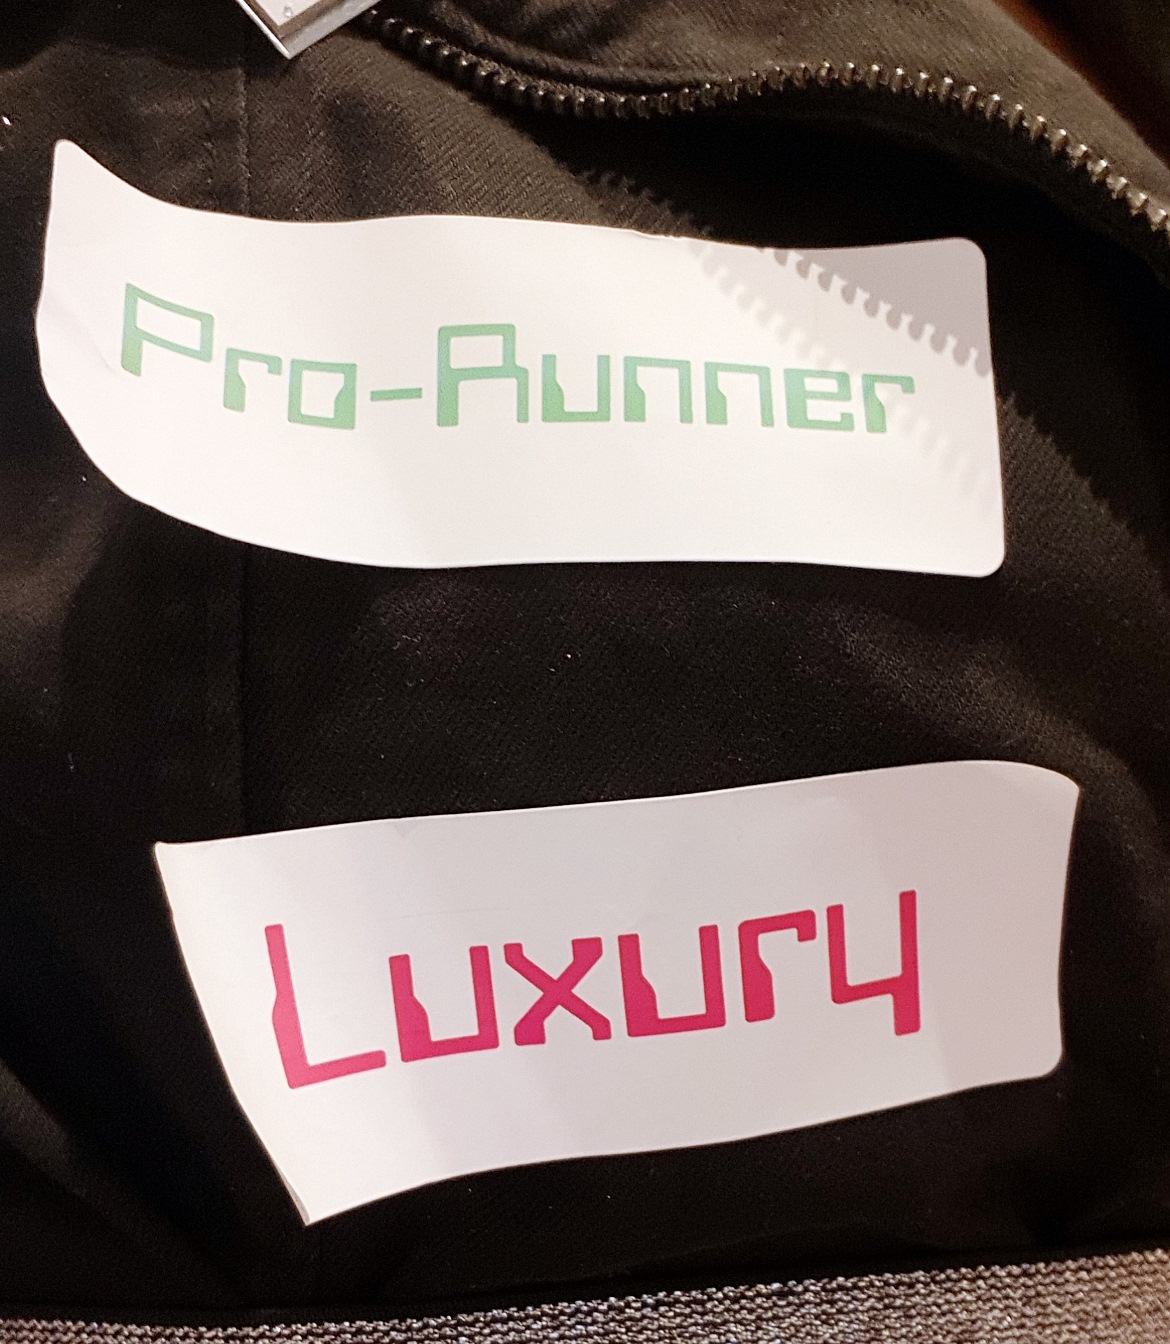 Pro-Runner and Luxury - Mirrorshades megagame after action report by BeckyBecky Blogs